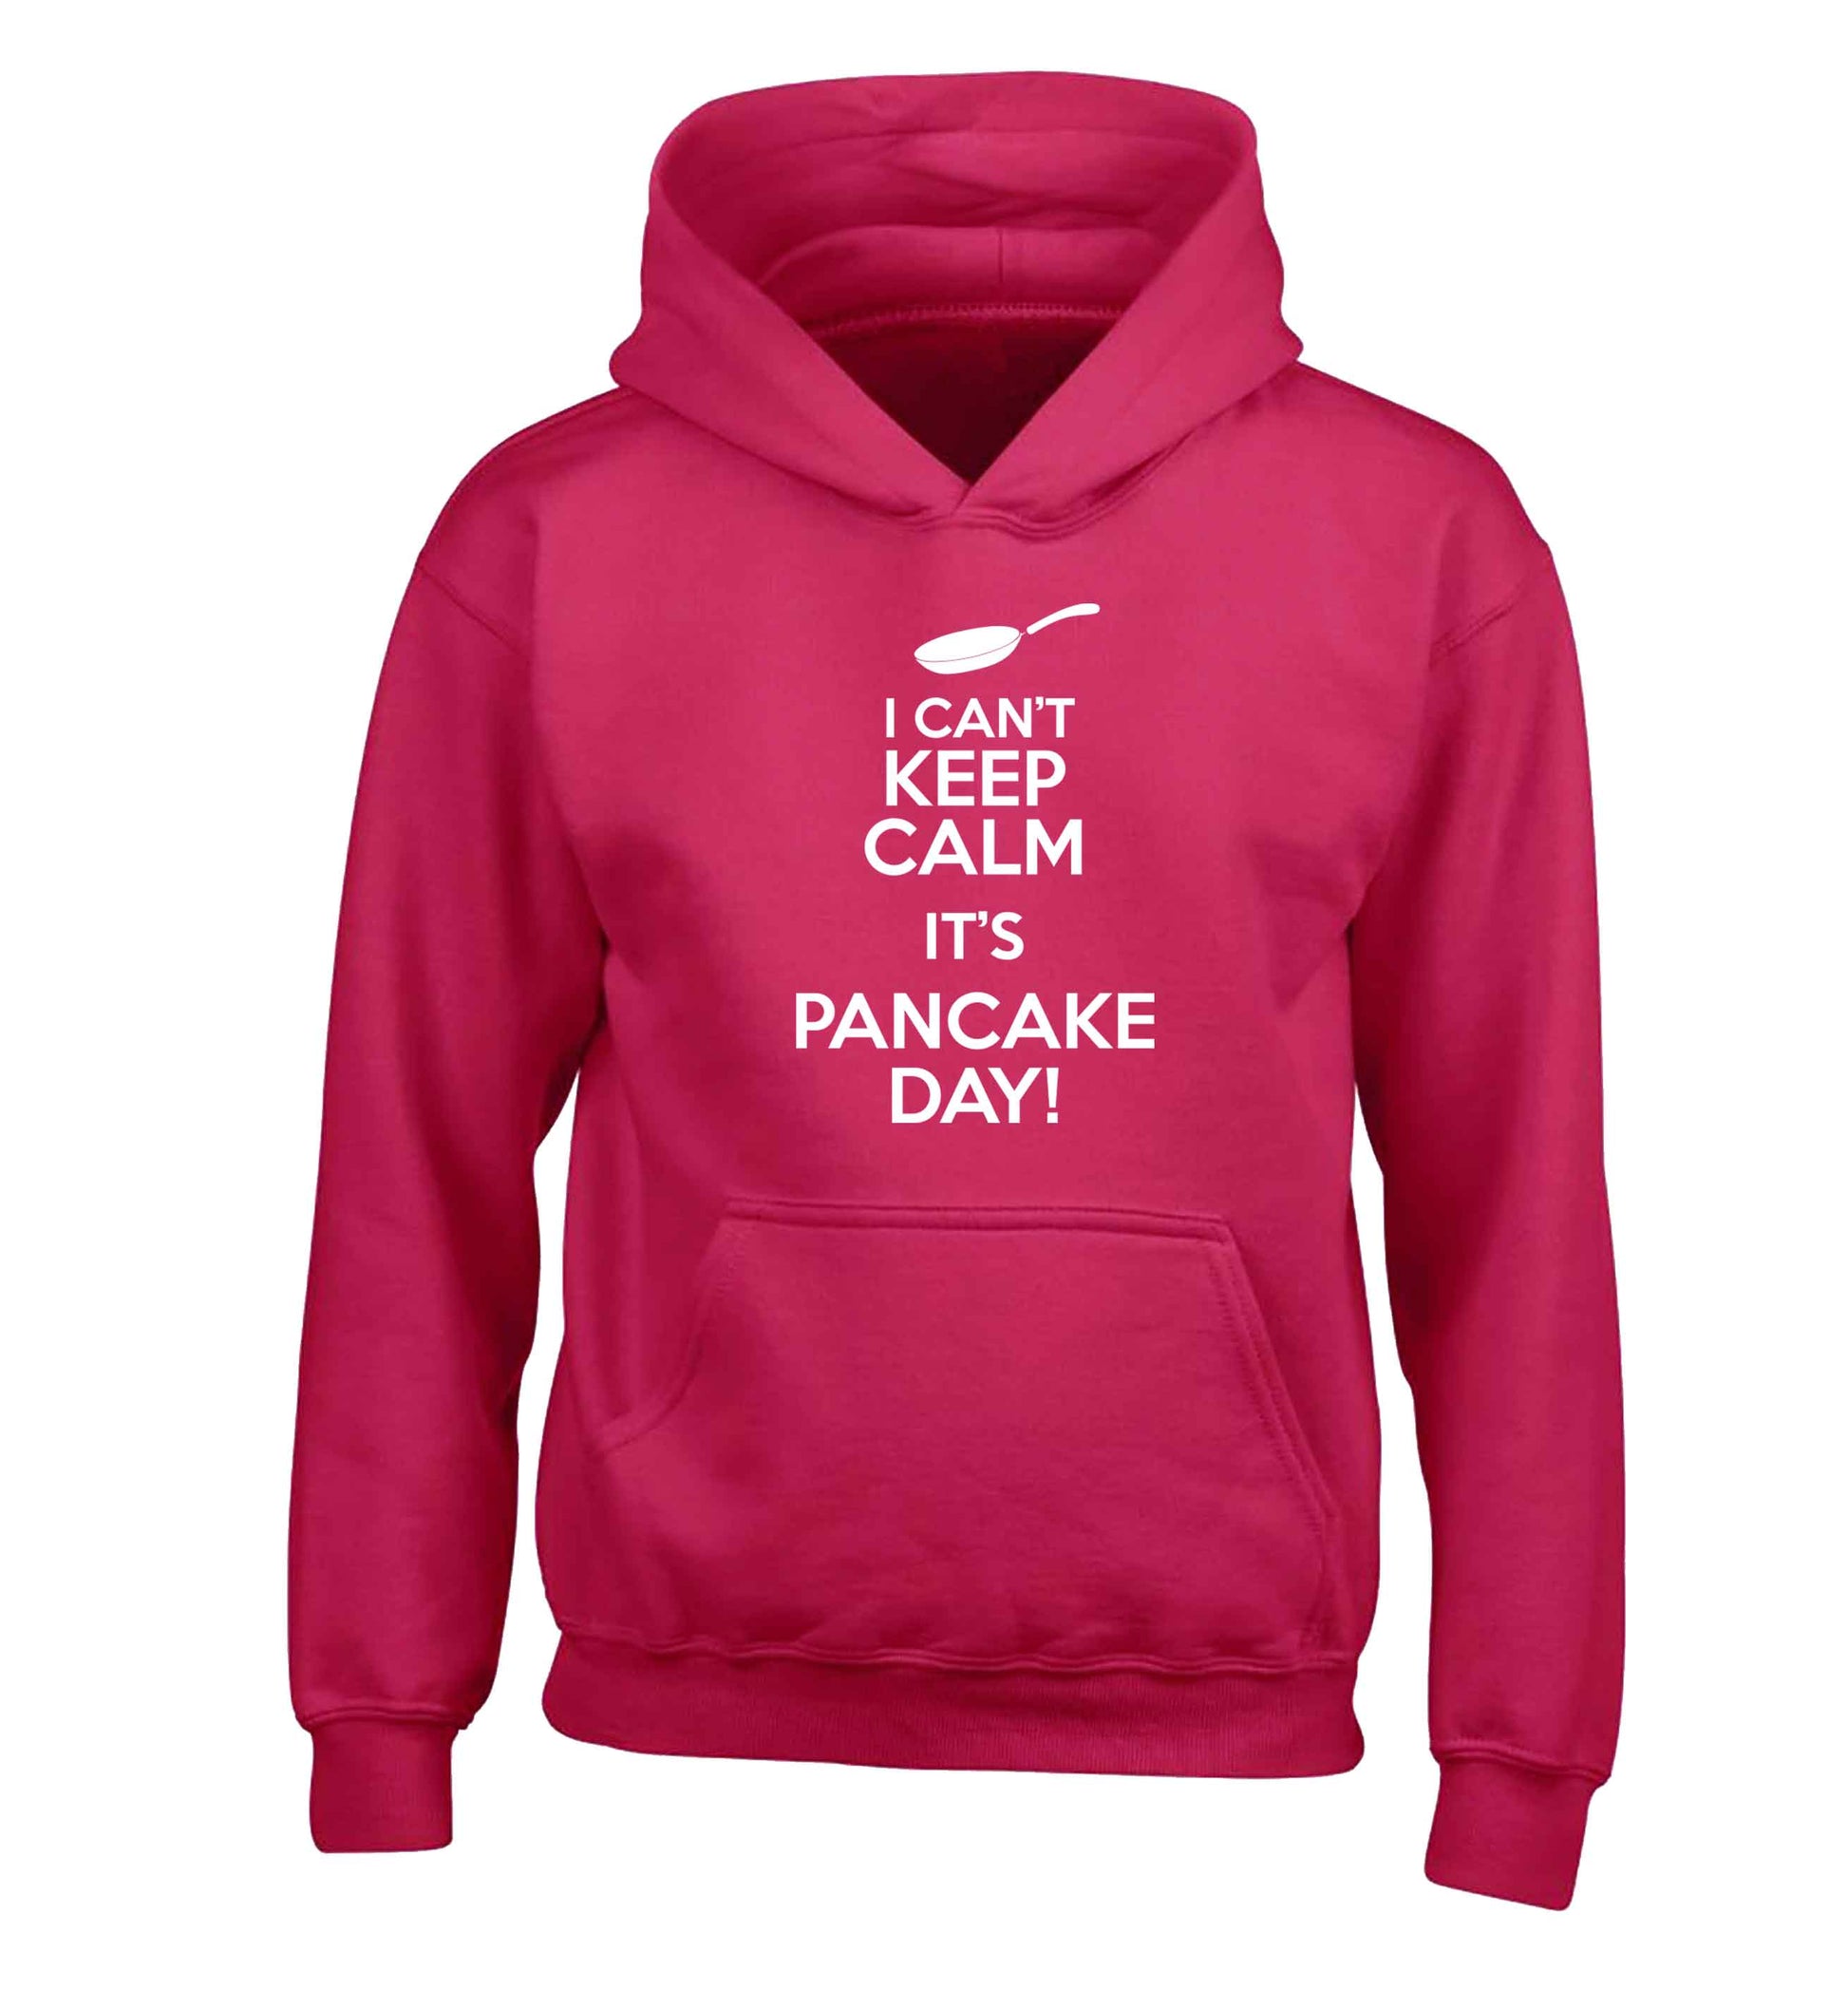 I can't keep calm it's pancake day! children's pink hoodie 12-13 Years